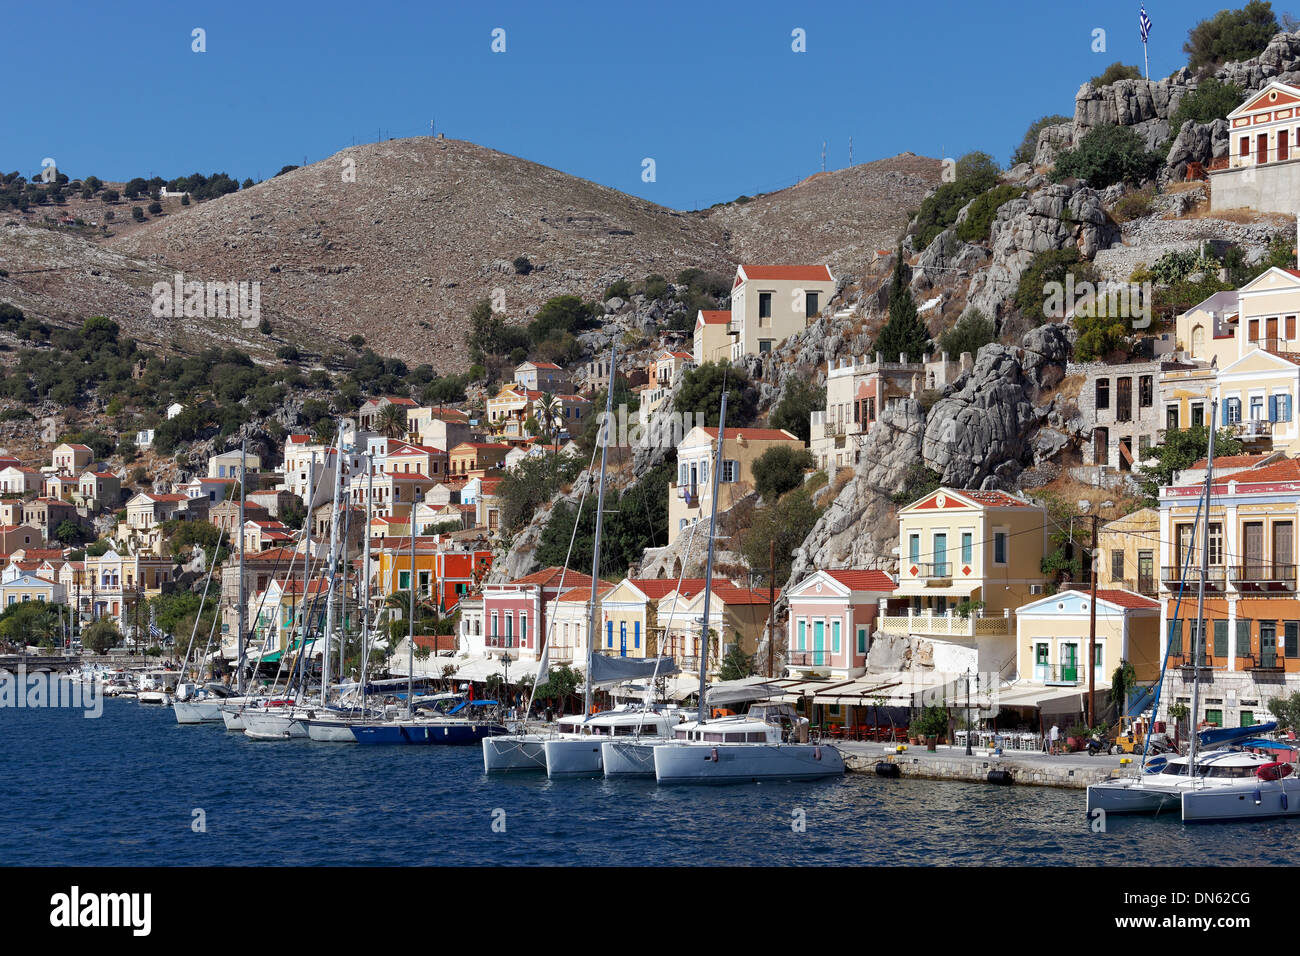 Harbour of the town of Symi with picturesque houses in the neo-classical style, Symi, Symi Island, Dodecanese, Greece Stock Photo